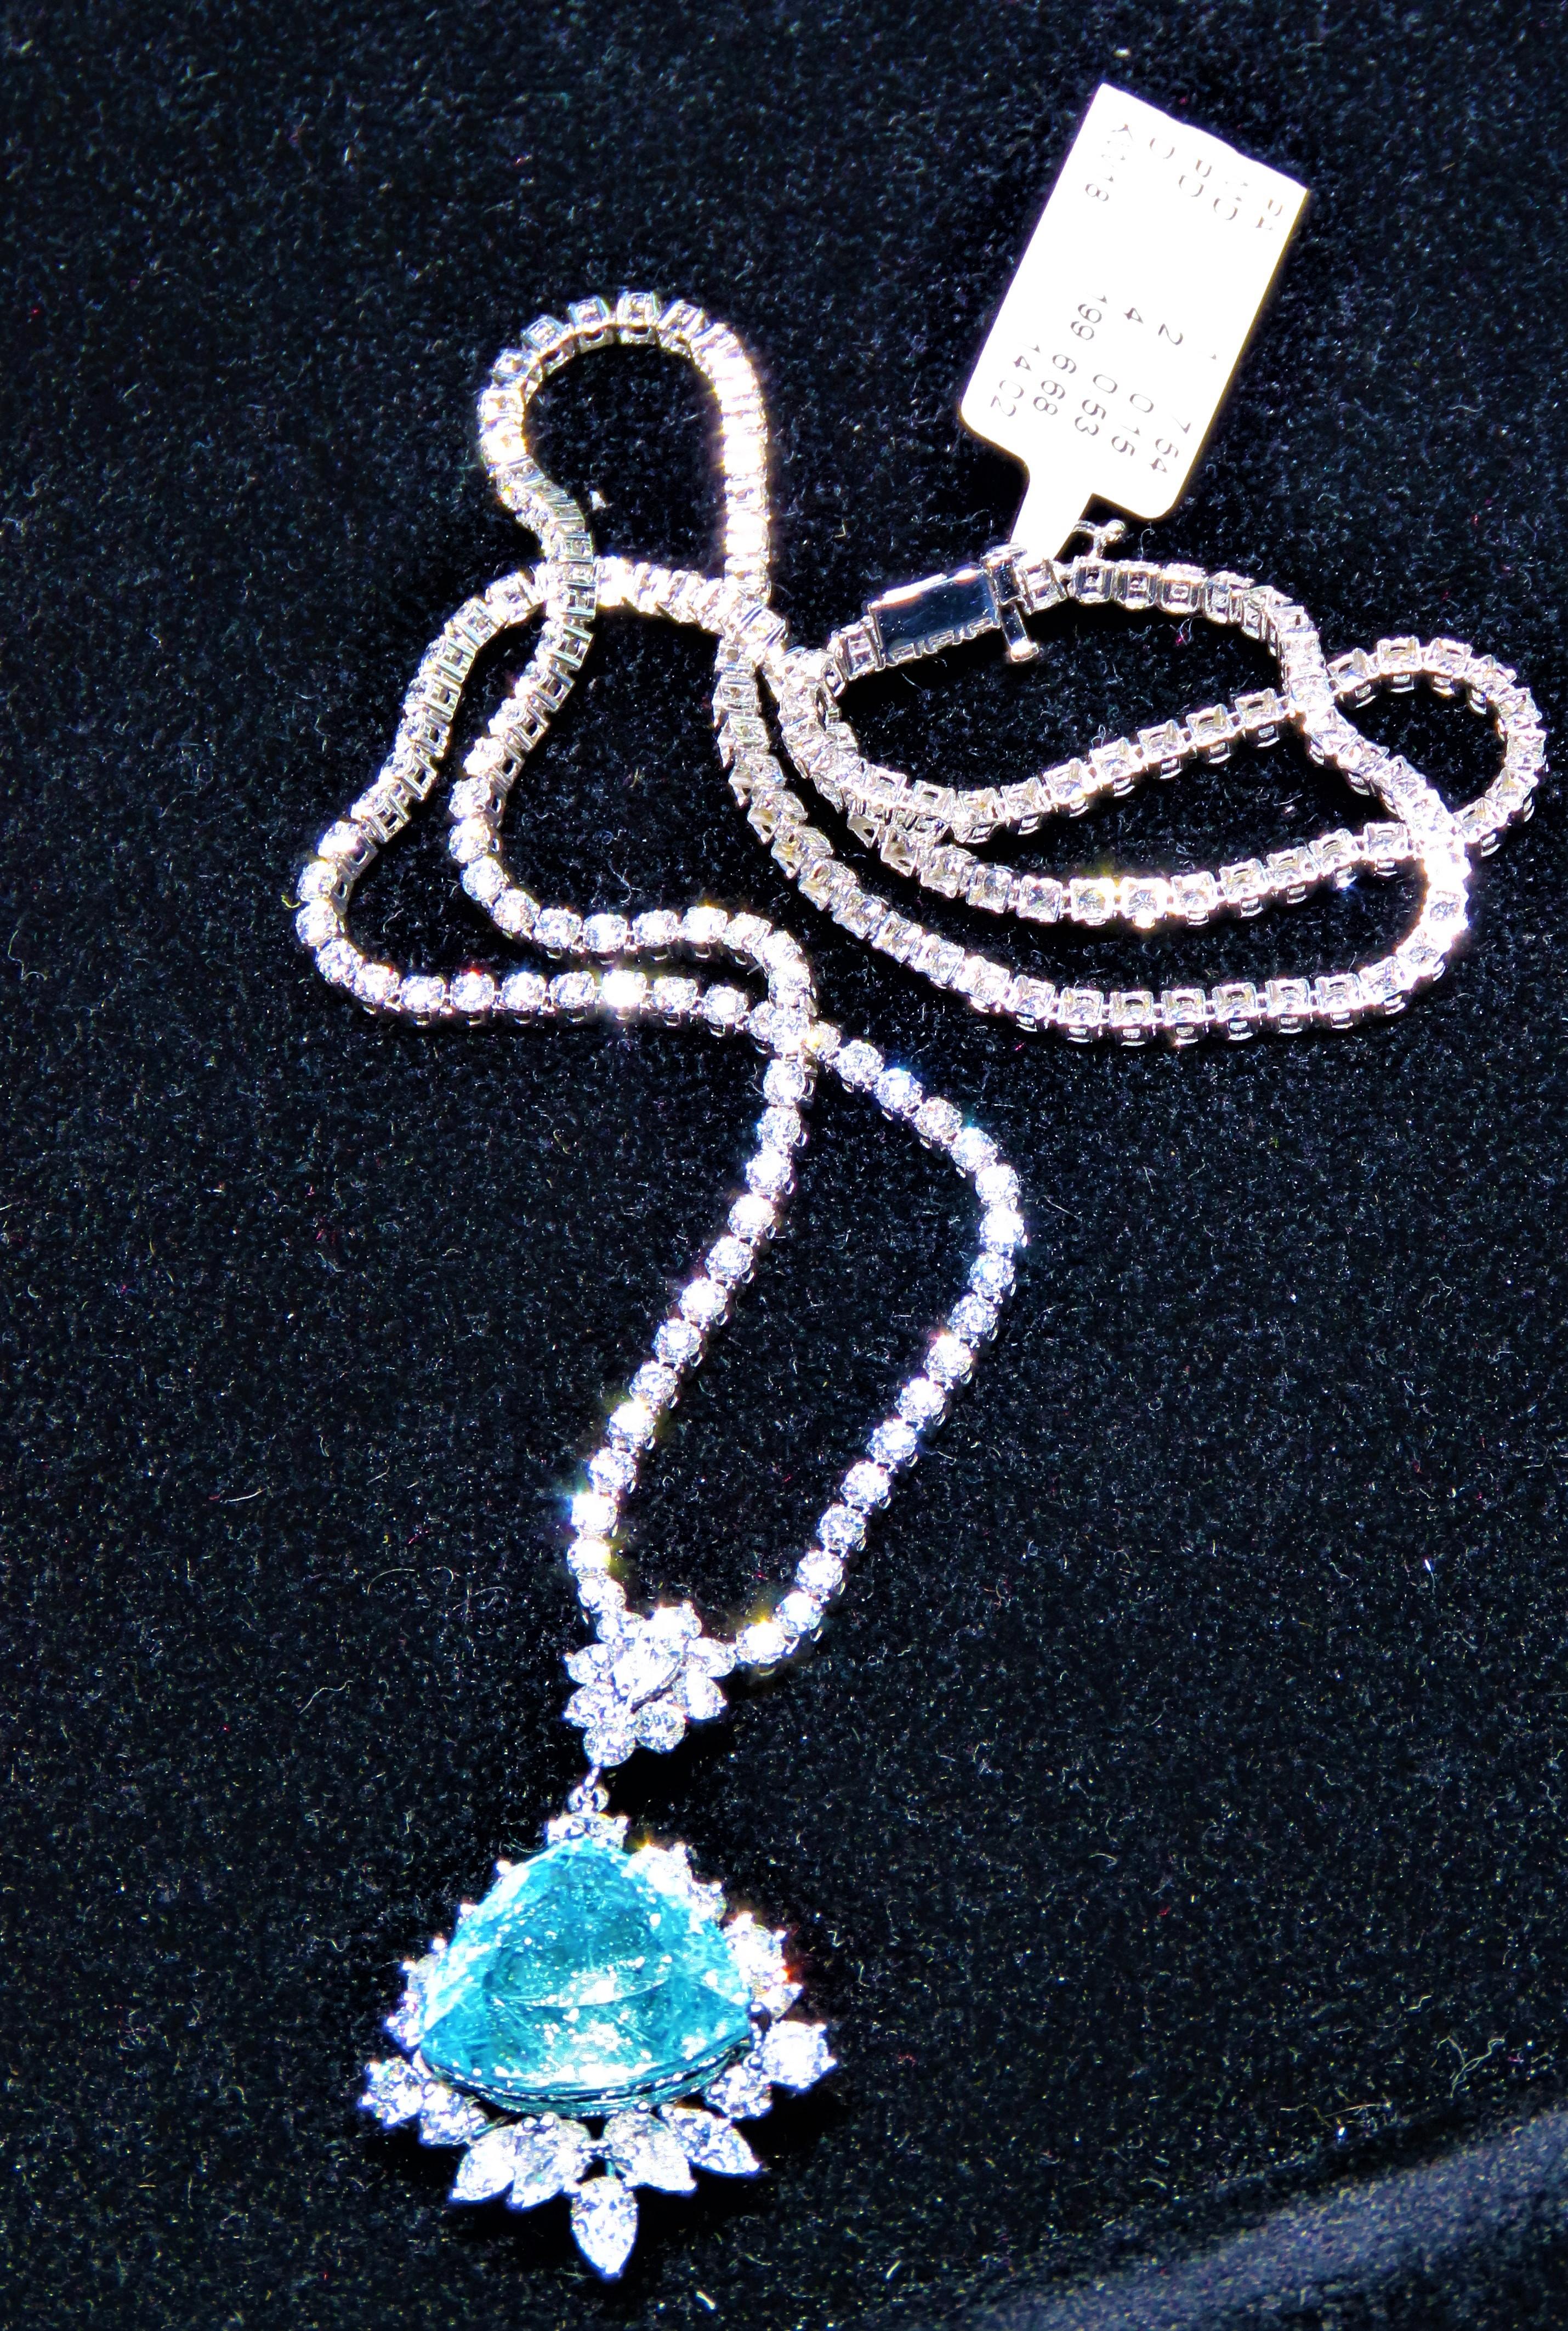 The Following Items we are offering is a Rare Important Gorgeous 18KT White Gold Glittering Diamond and Paraiba Tourmaline Necklace!!!! Necklace features Outstanding Multi Shaped Shimmering and Glittering Extremely Rare Fancy Cut Large Paraiba